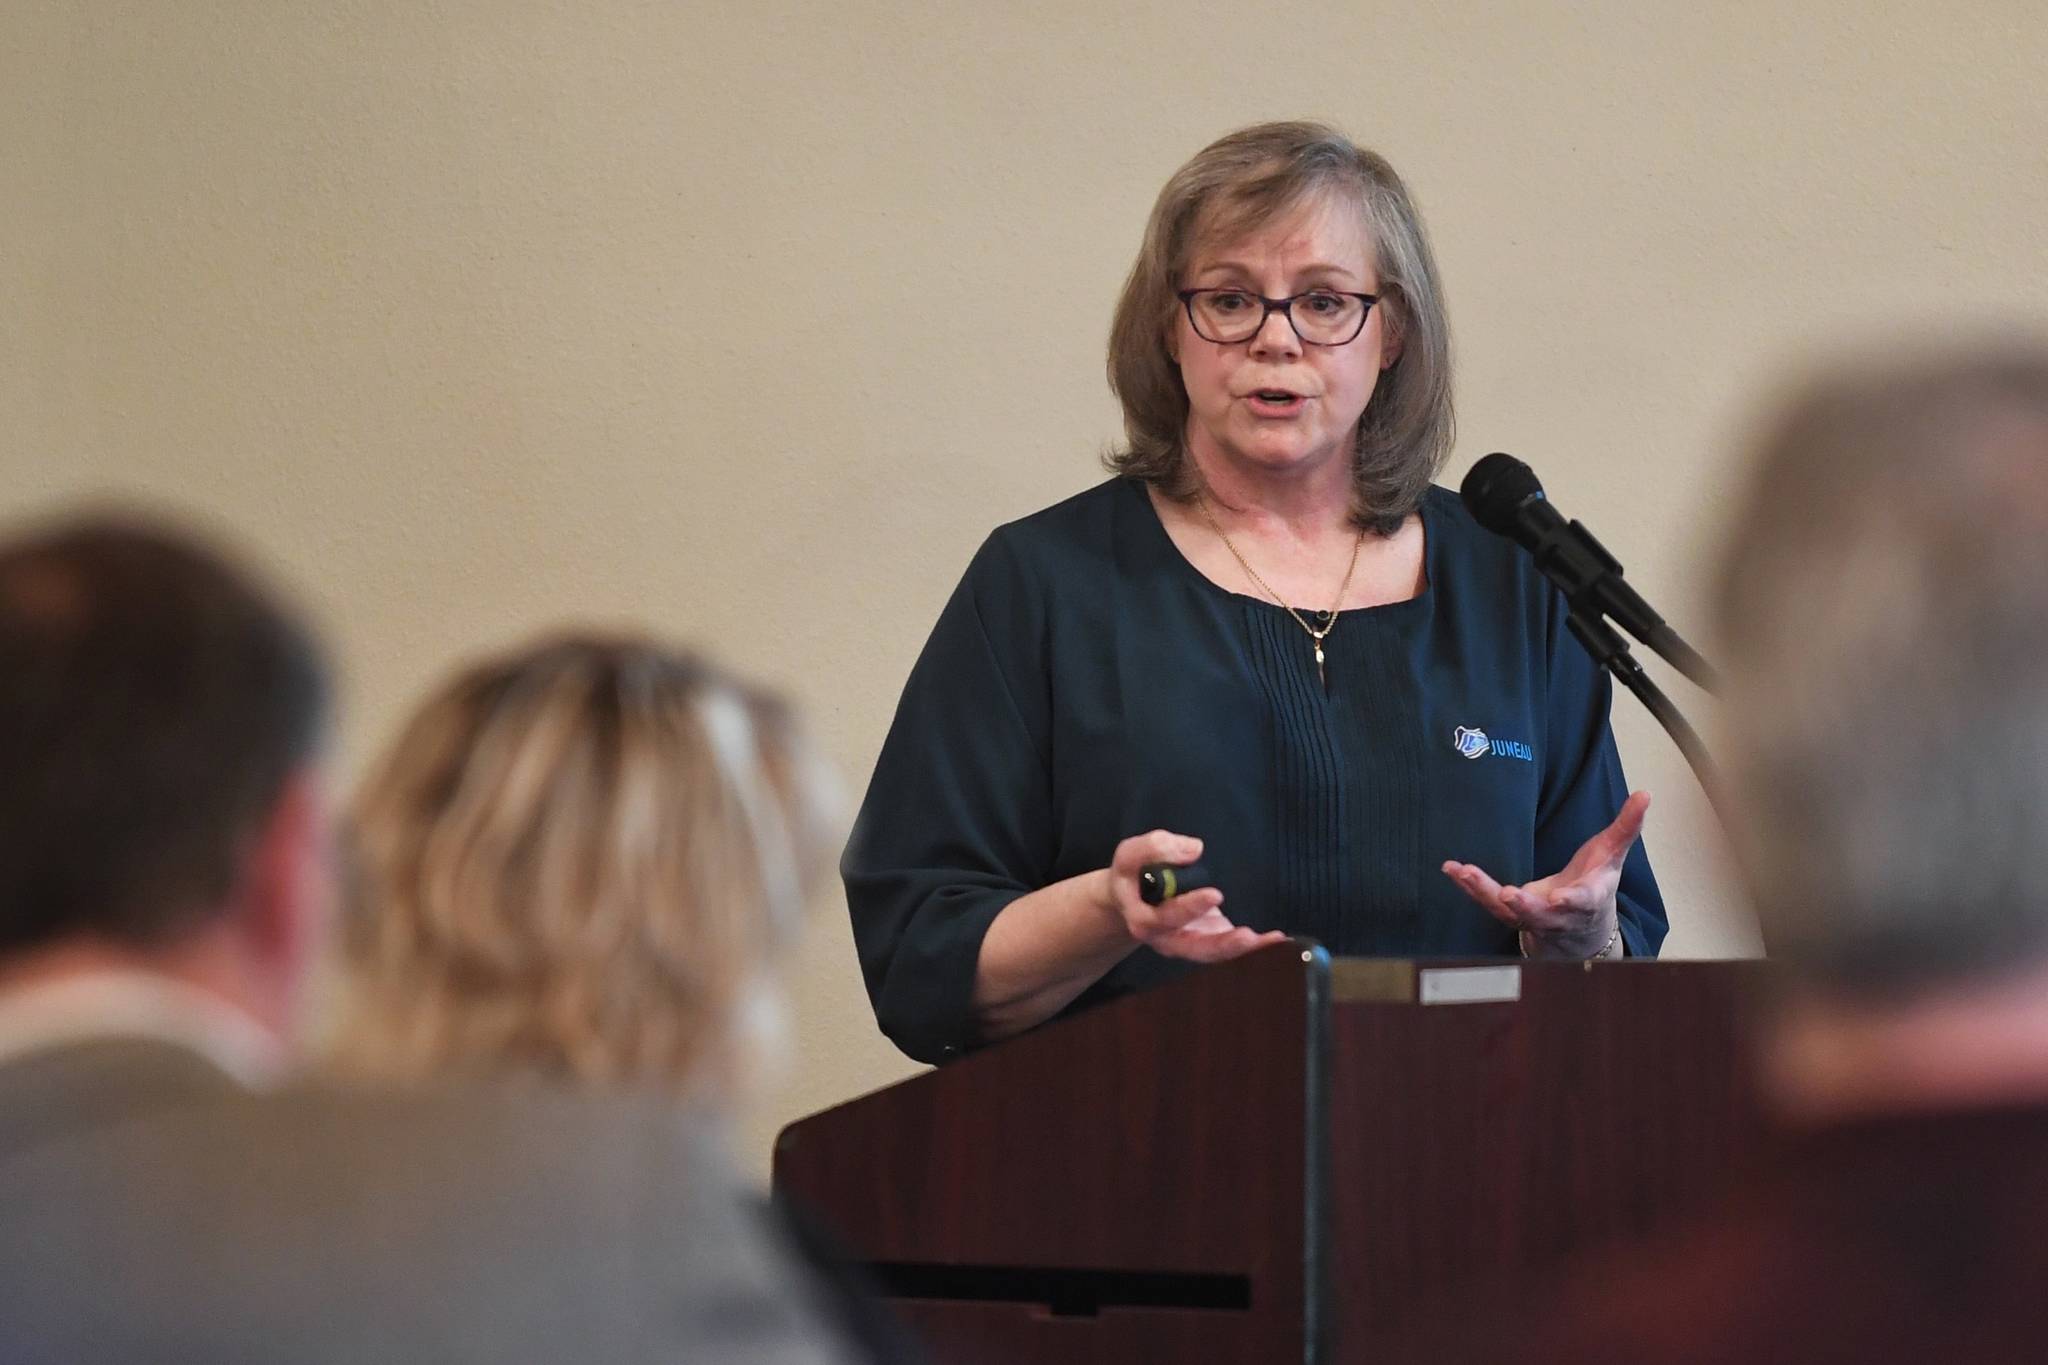 Liz Perry, President and CEO of Travel Juneau, speaks to the Greater Juneau Chamber of Commerce during its weekly luncheon at the Moose Lodge on Thursday, May 9, 2019. (Michael Penn | Juneau Empire)